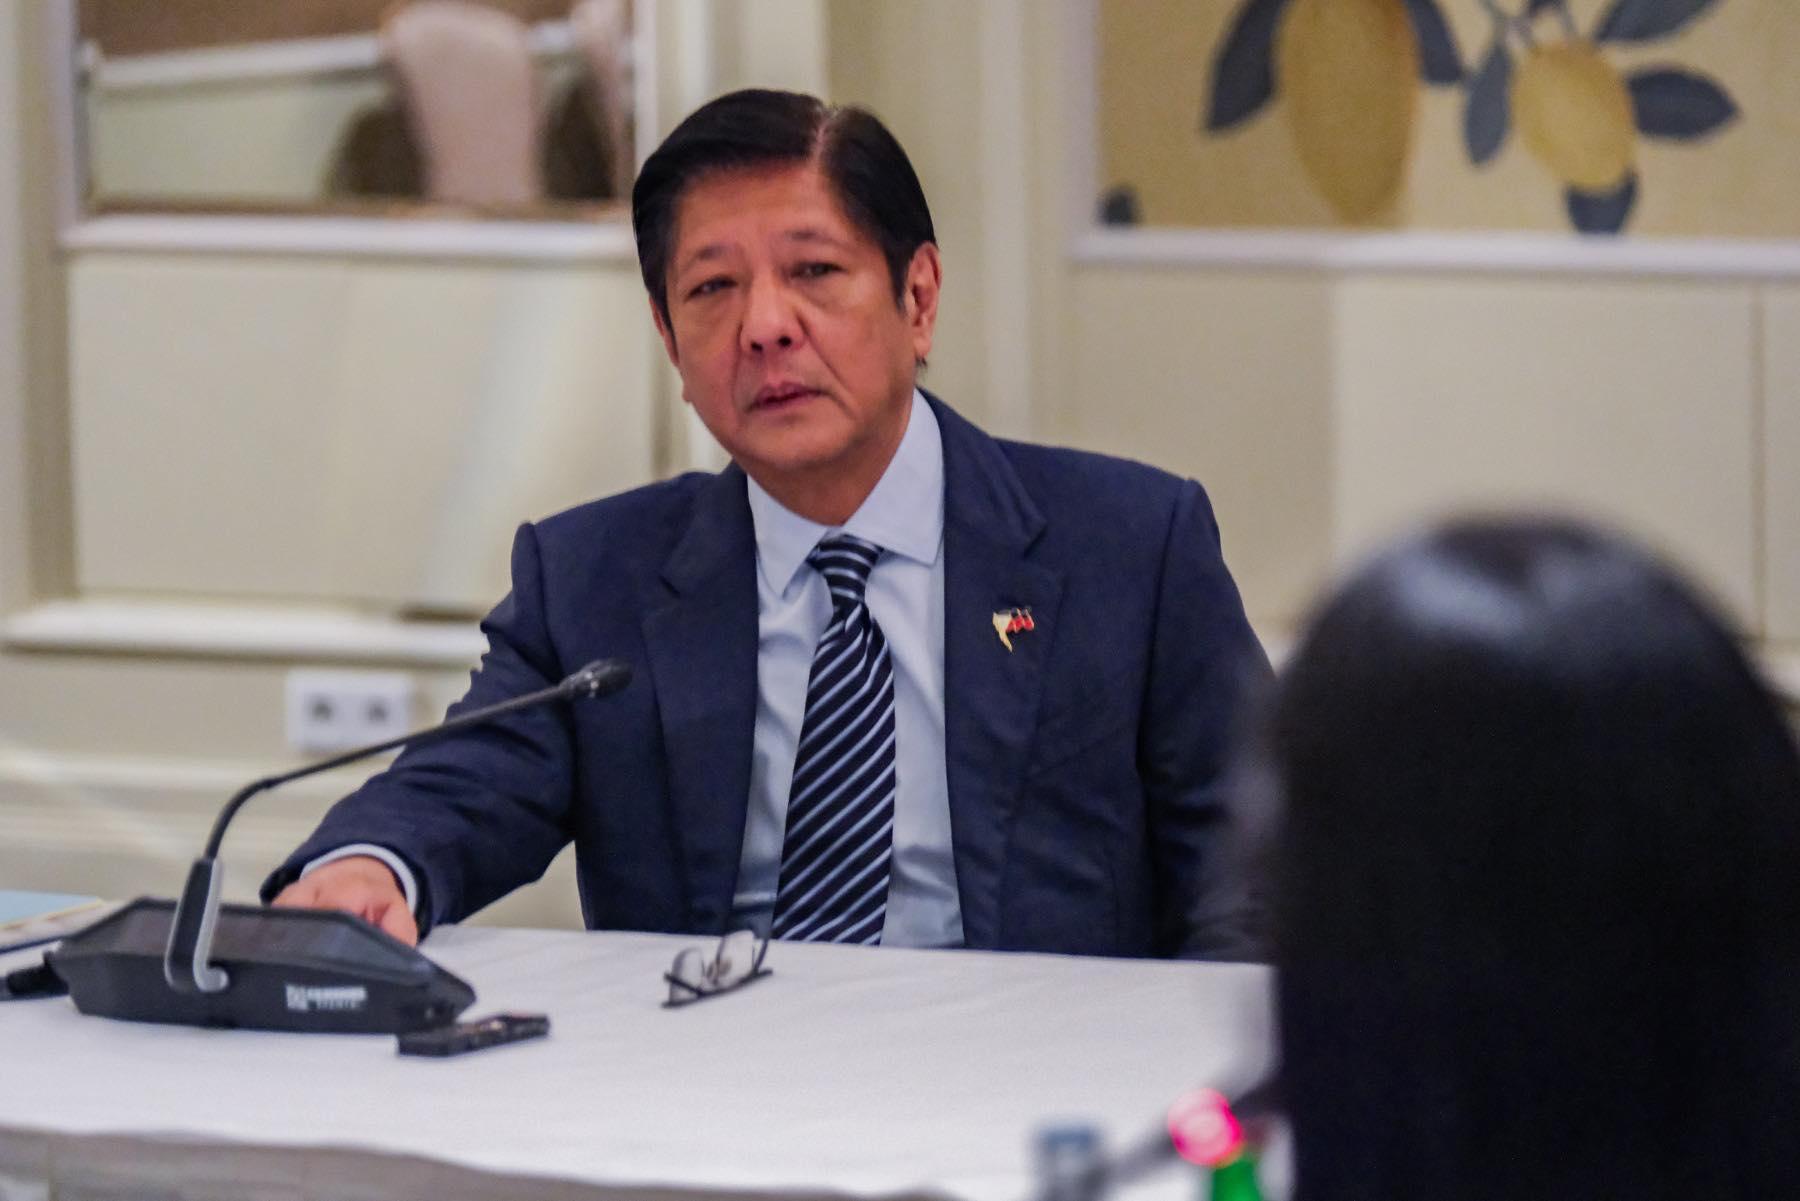 Marcos proclaims July 17 as National CPR Day